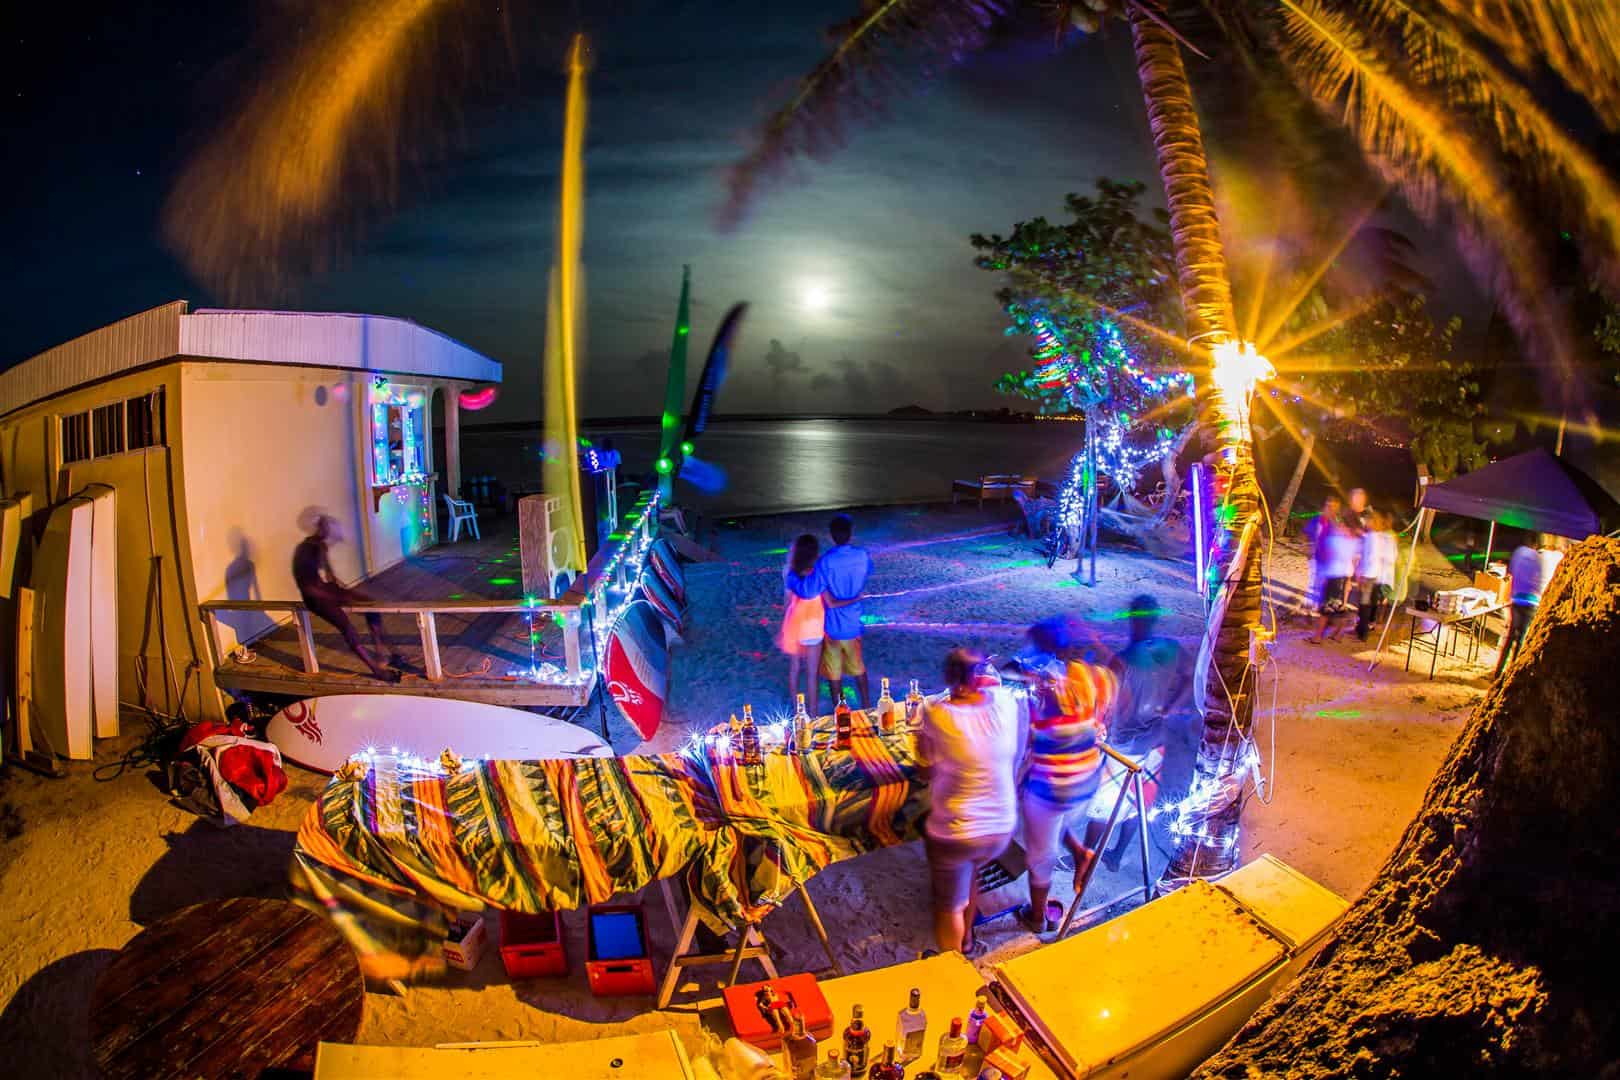 Union Island Full moon party 2014-2015 schedule